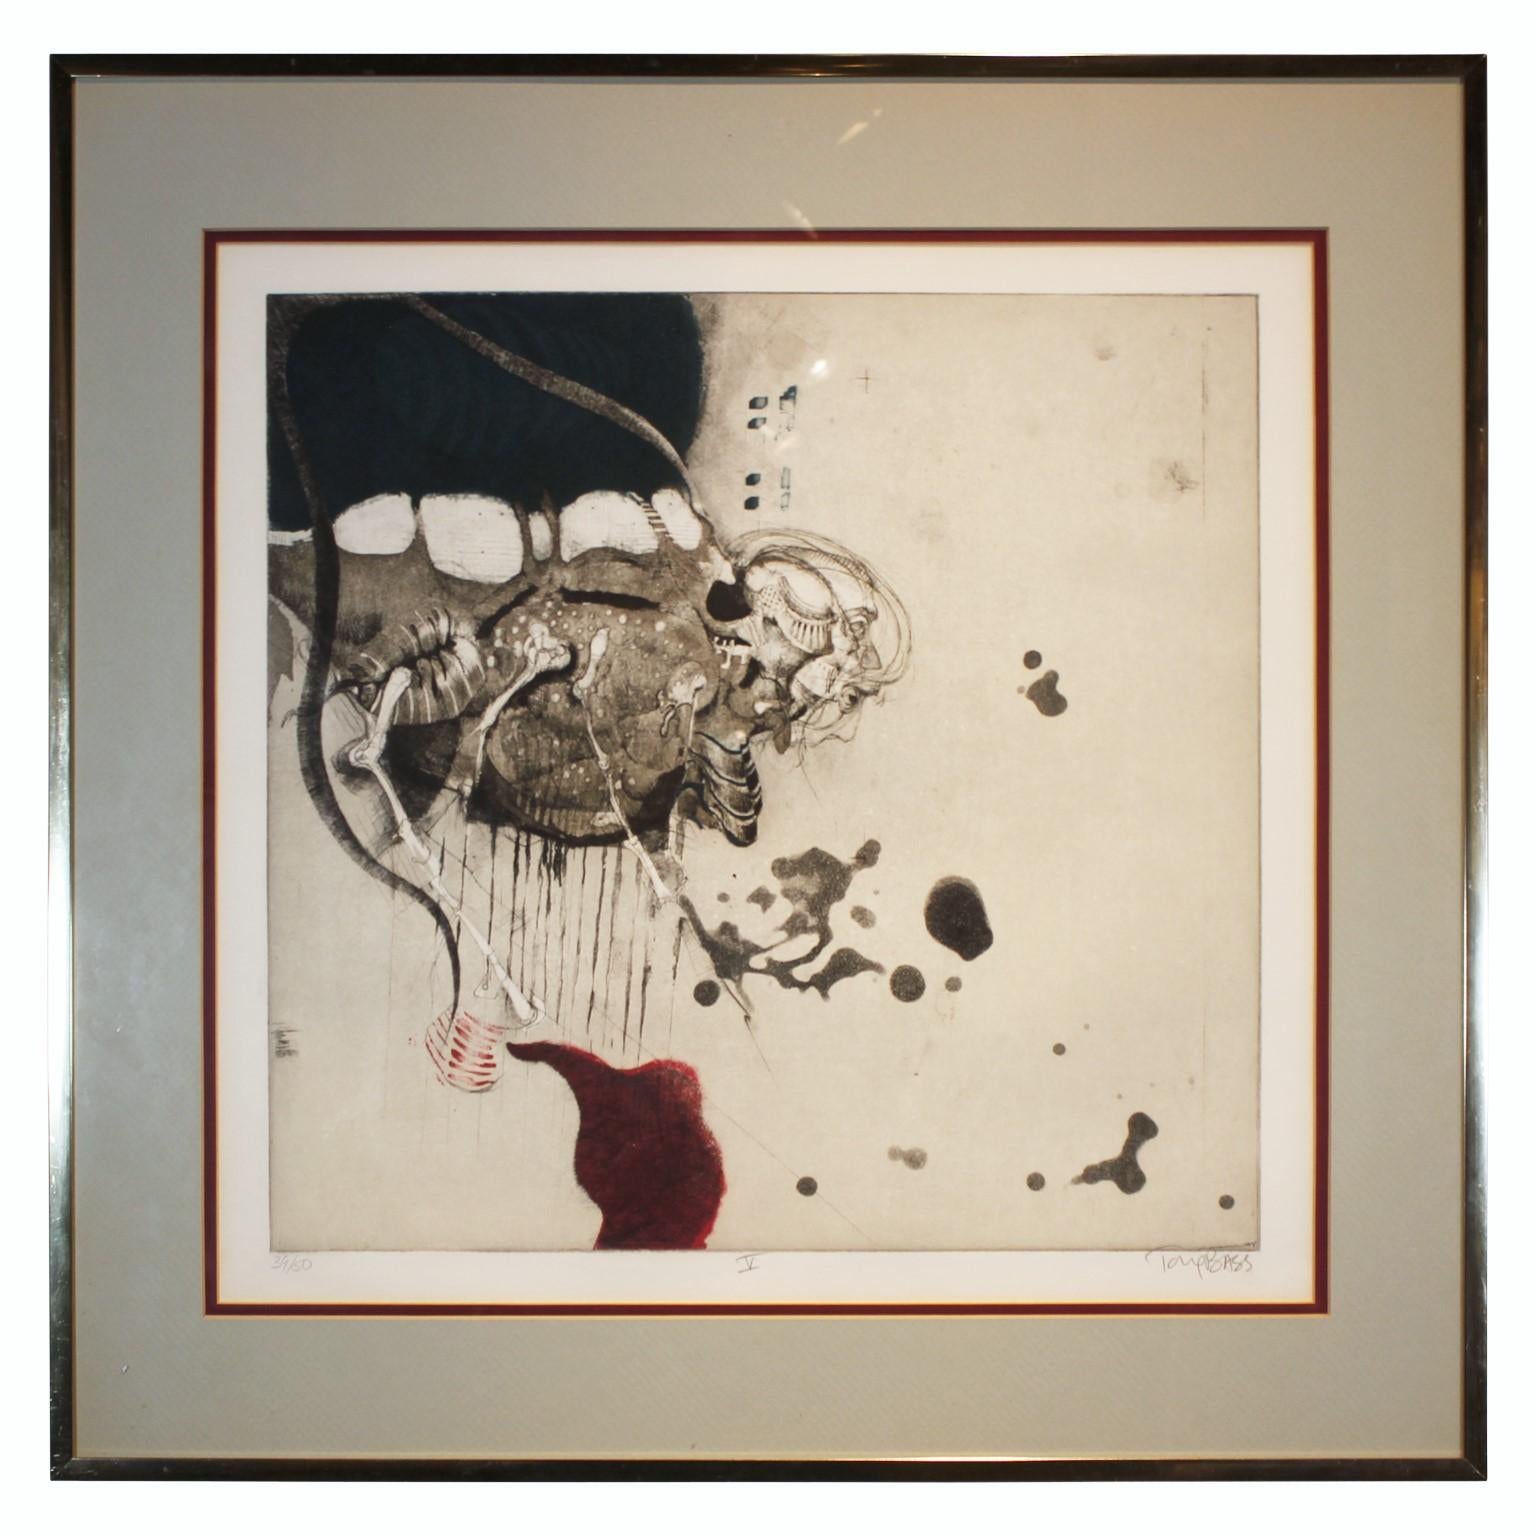 Tony Bass Abstract Print - "V" Contemporary Abstract Surrealist Lithograph, Edition 39 of 50 